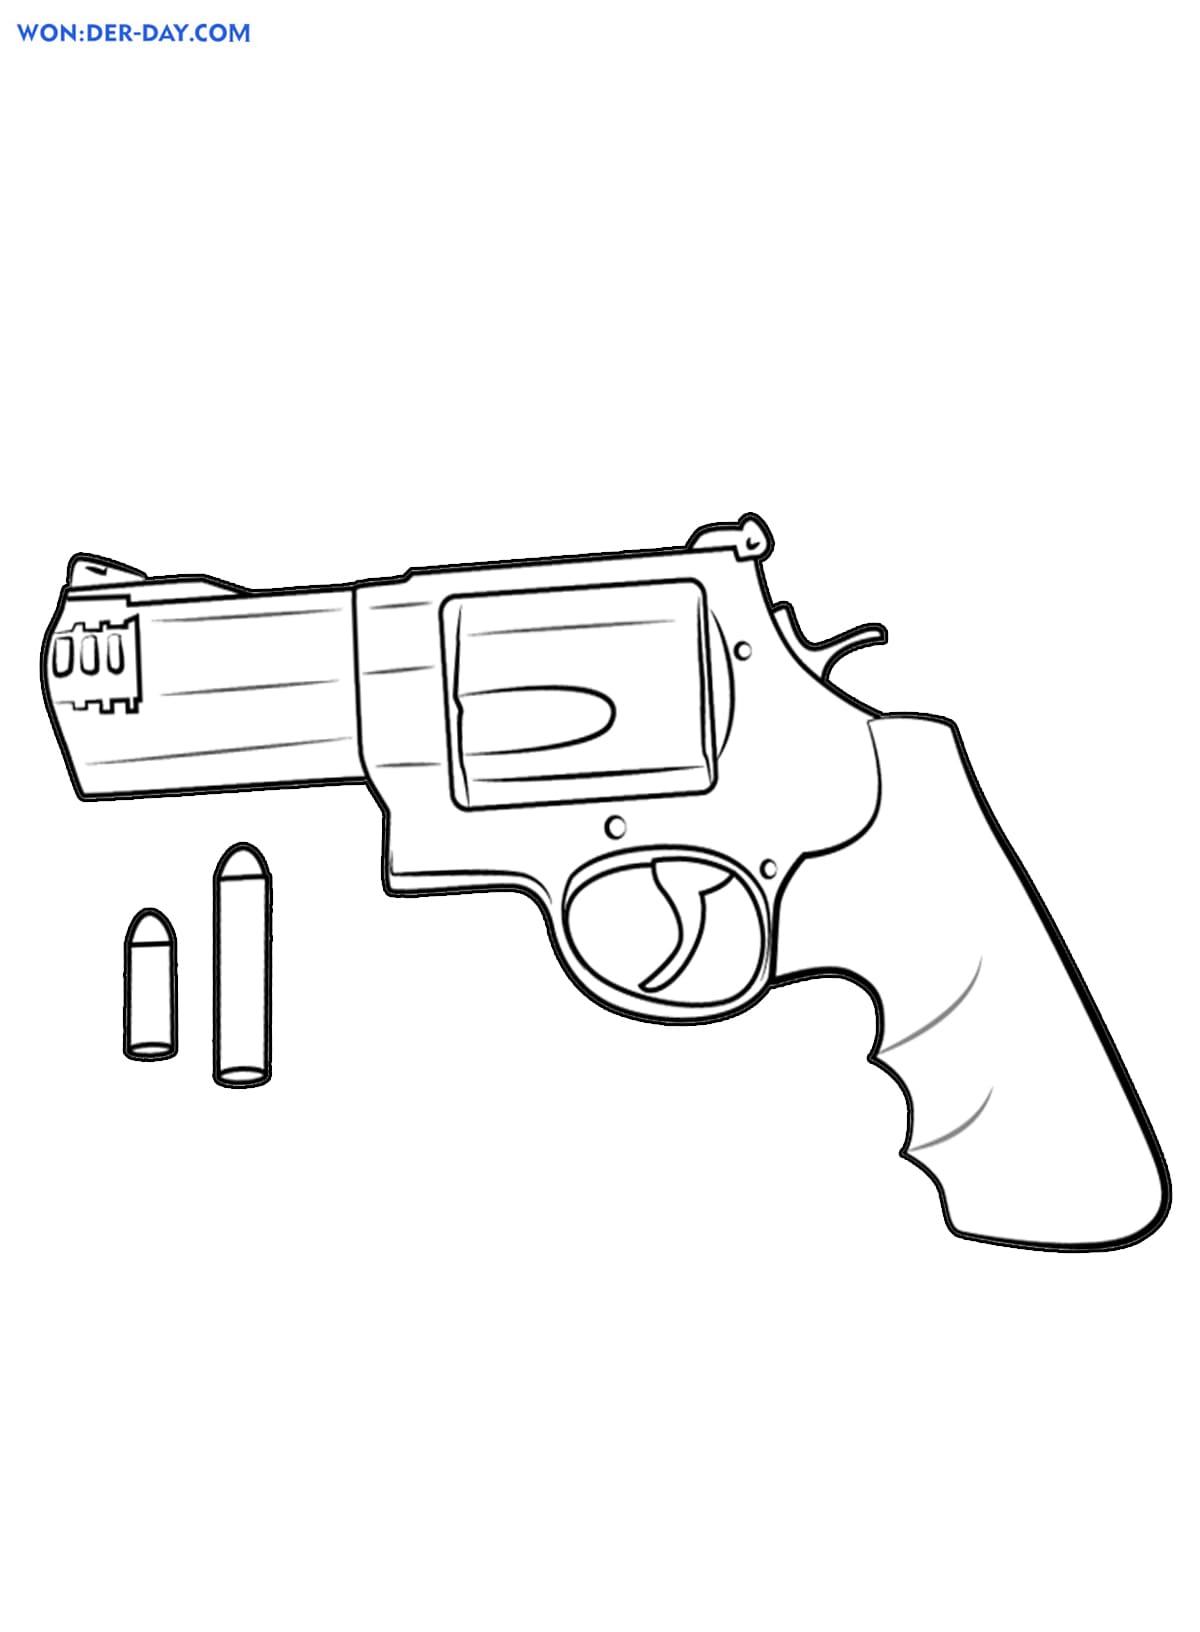 Weapon coloring pages . Print for boys | WONDER DAY — Coloring pages